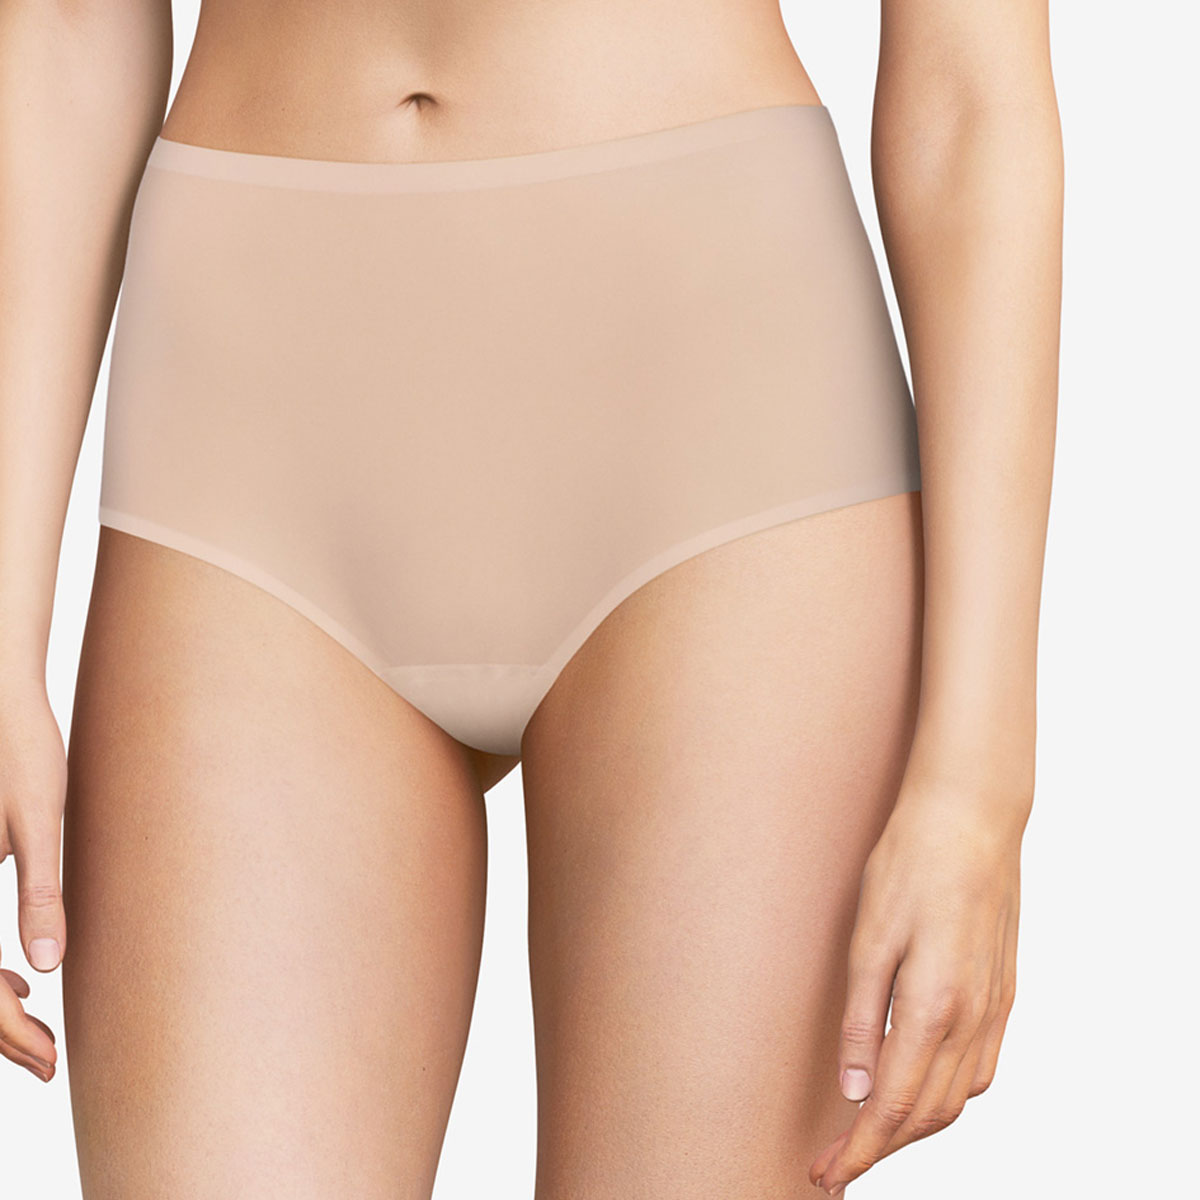 Chantelle - Style: C2857 High Waist Panty - Storm in A-G Cup